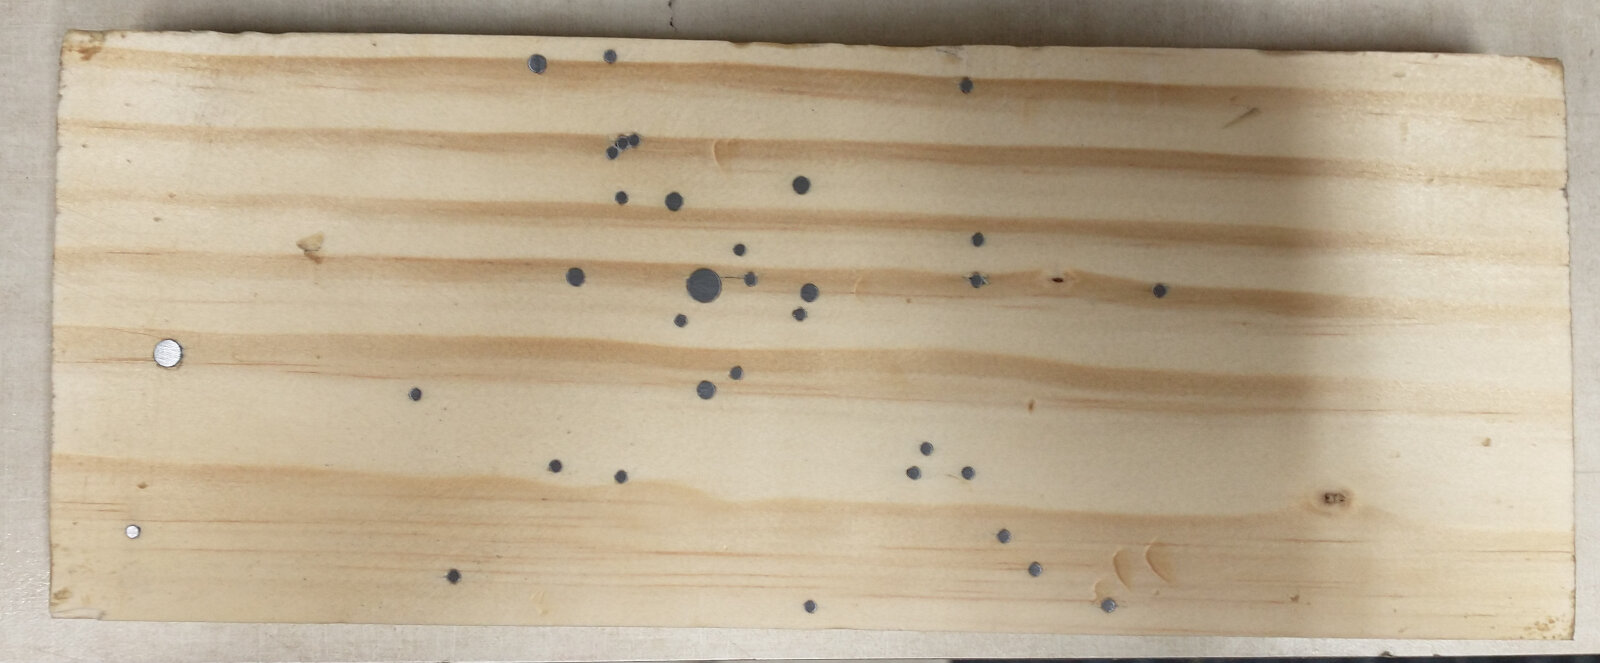 star chart magnet board prototype - nails